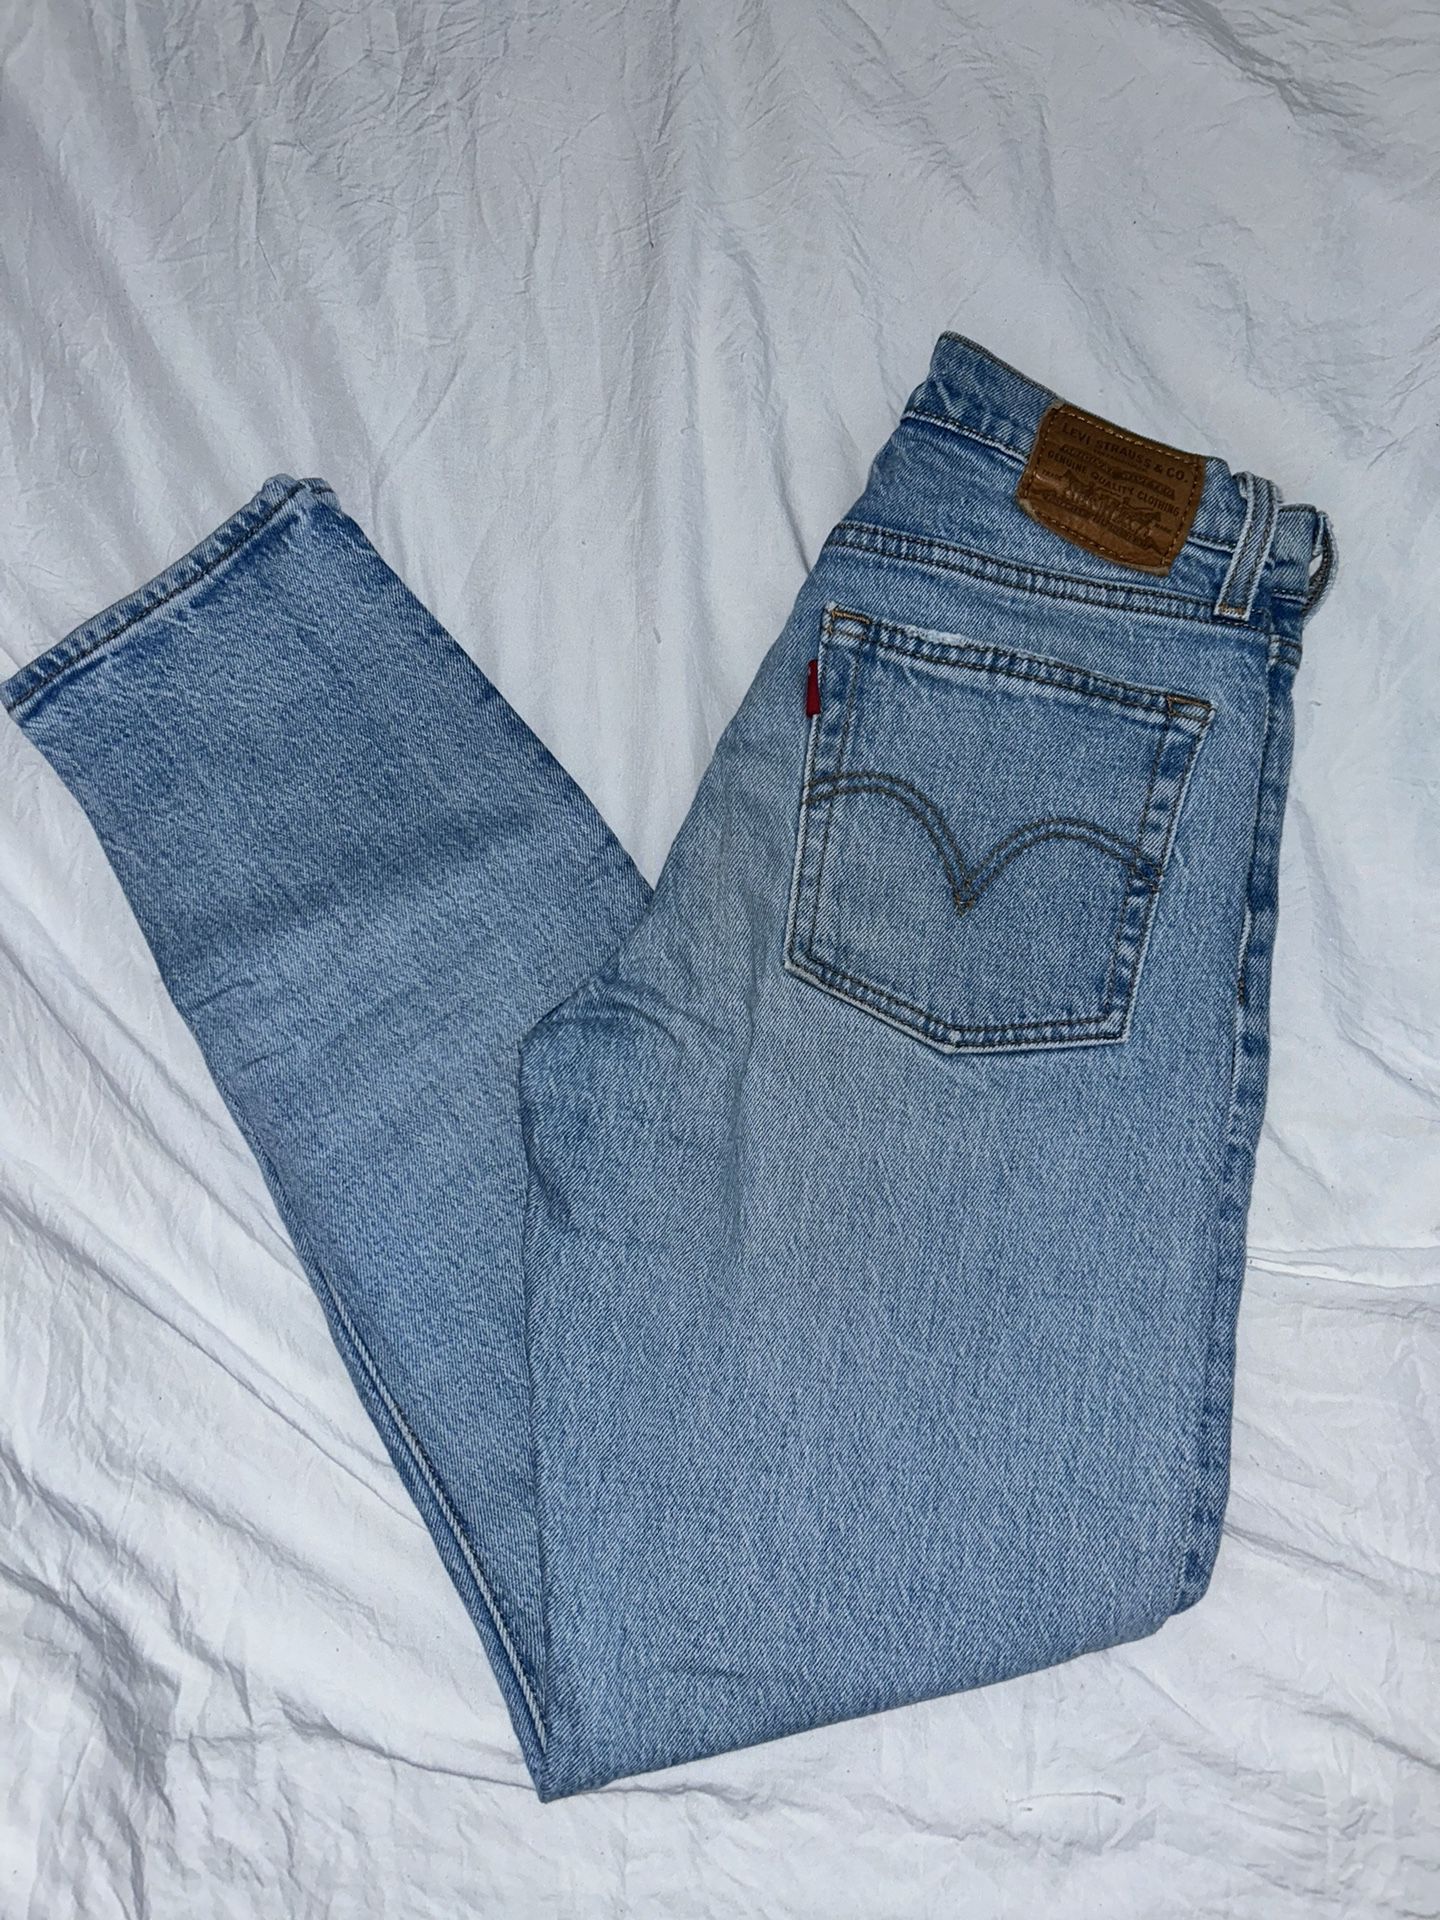 Levi Wedgie Jeans 